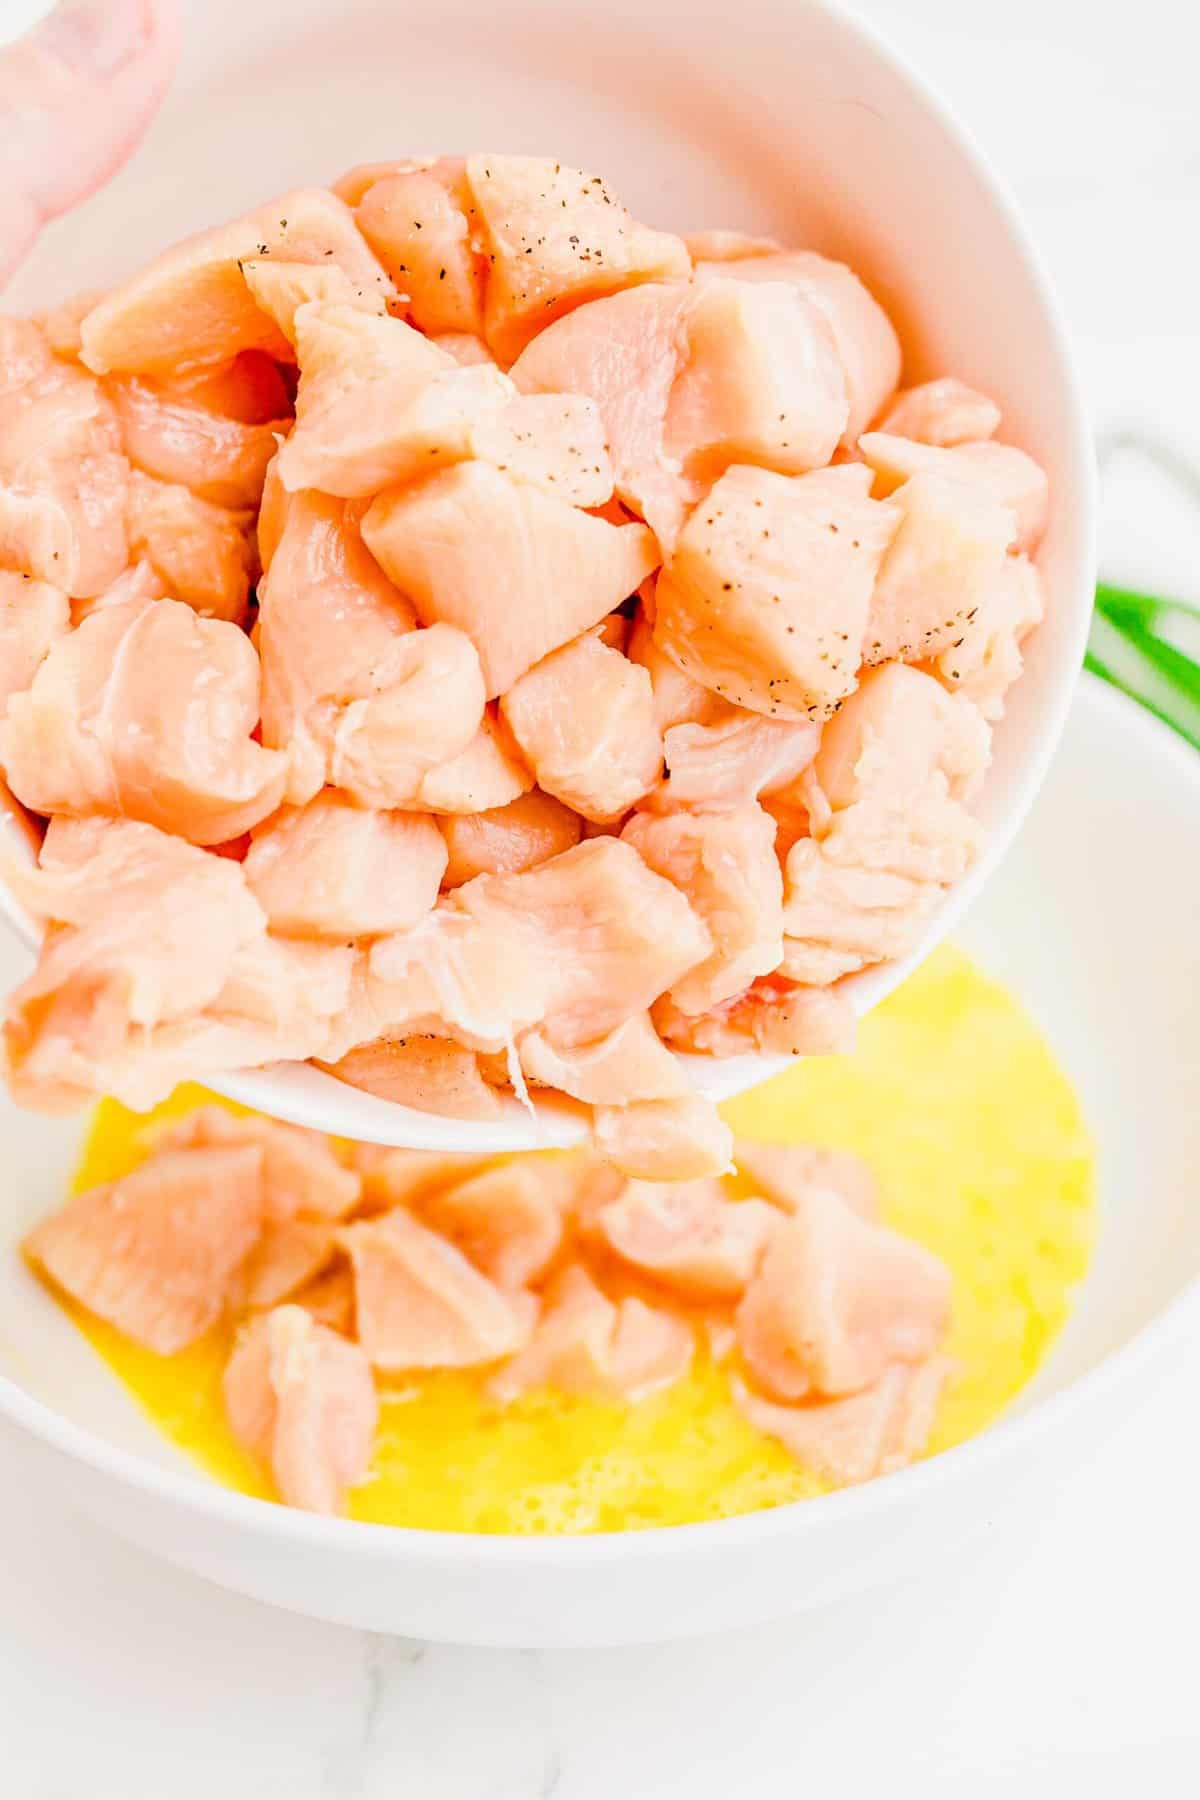 Coating raw chicken in egg